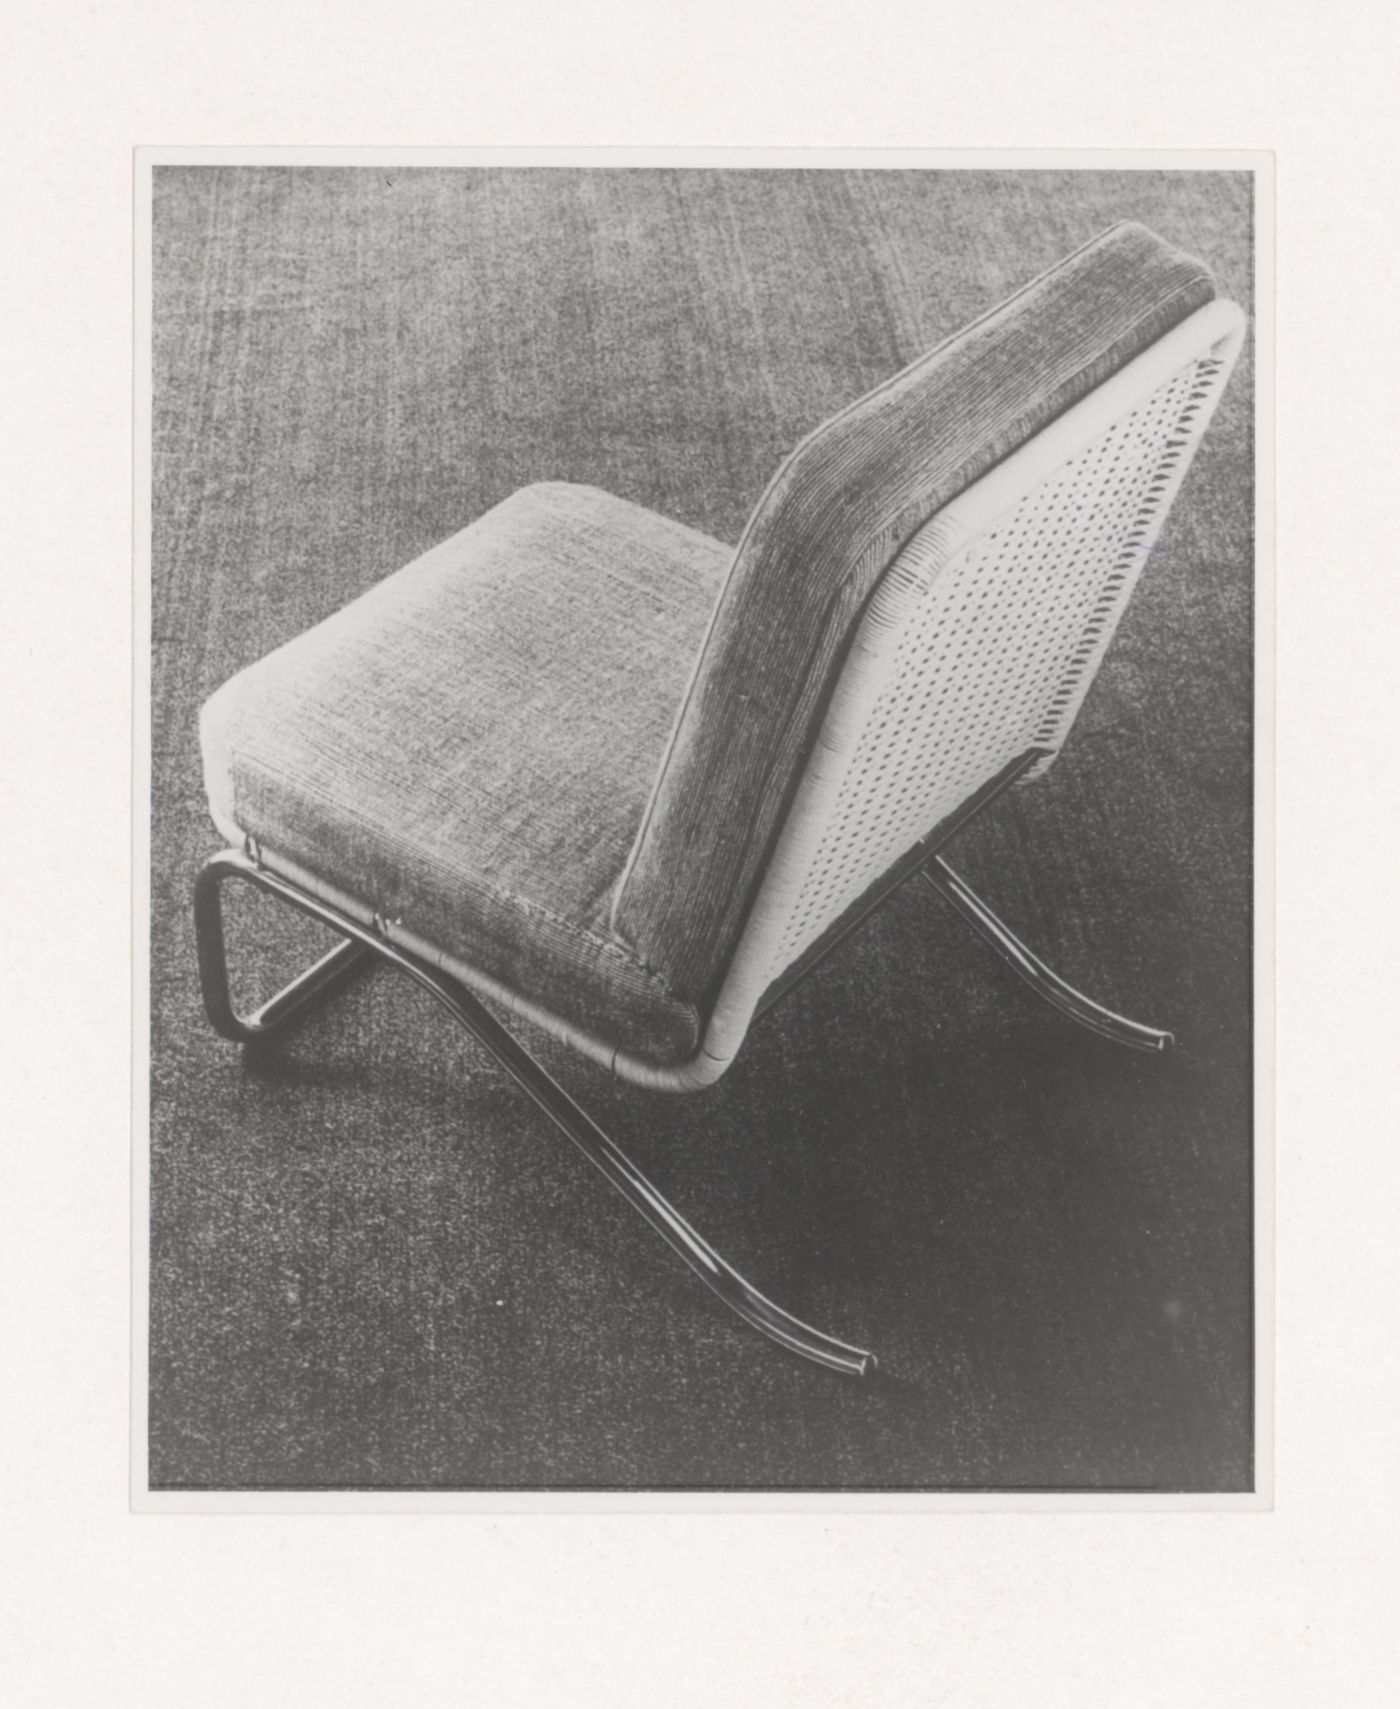 View of a side chair designed by J.J.P. Oud for Metz & Co., Amsterdam, Netherlands